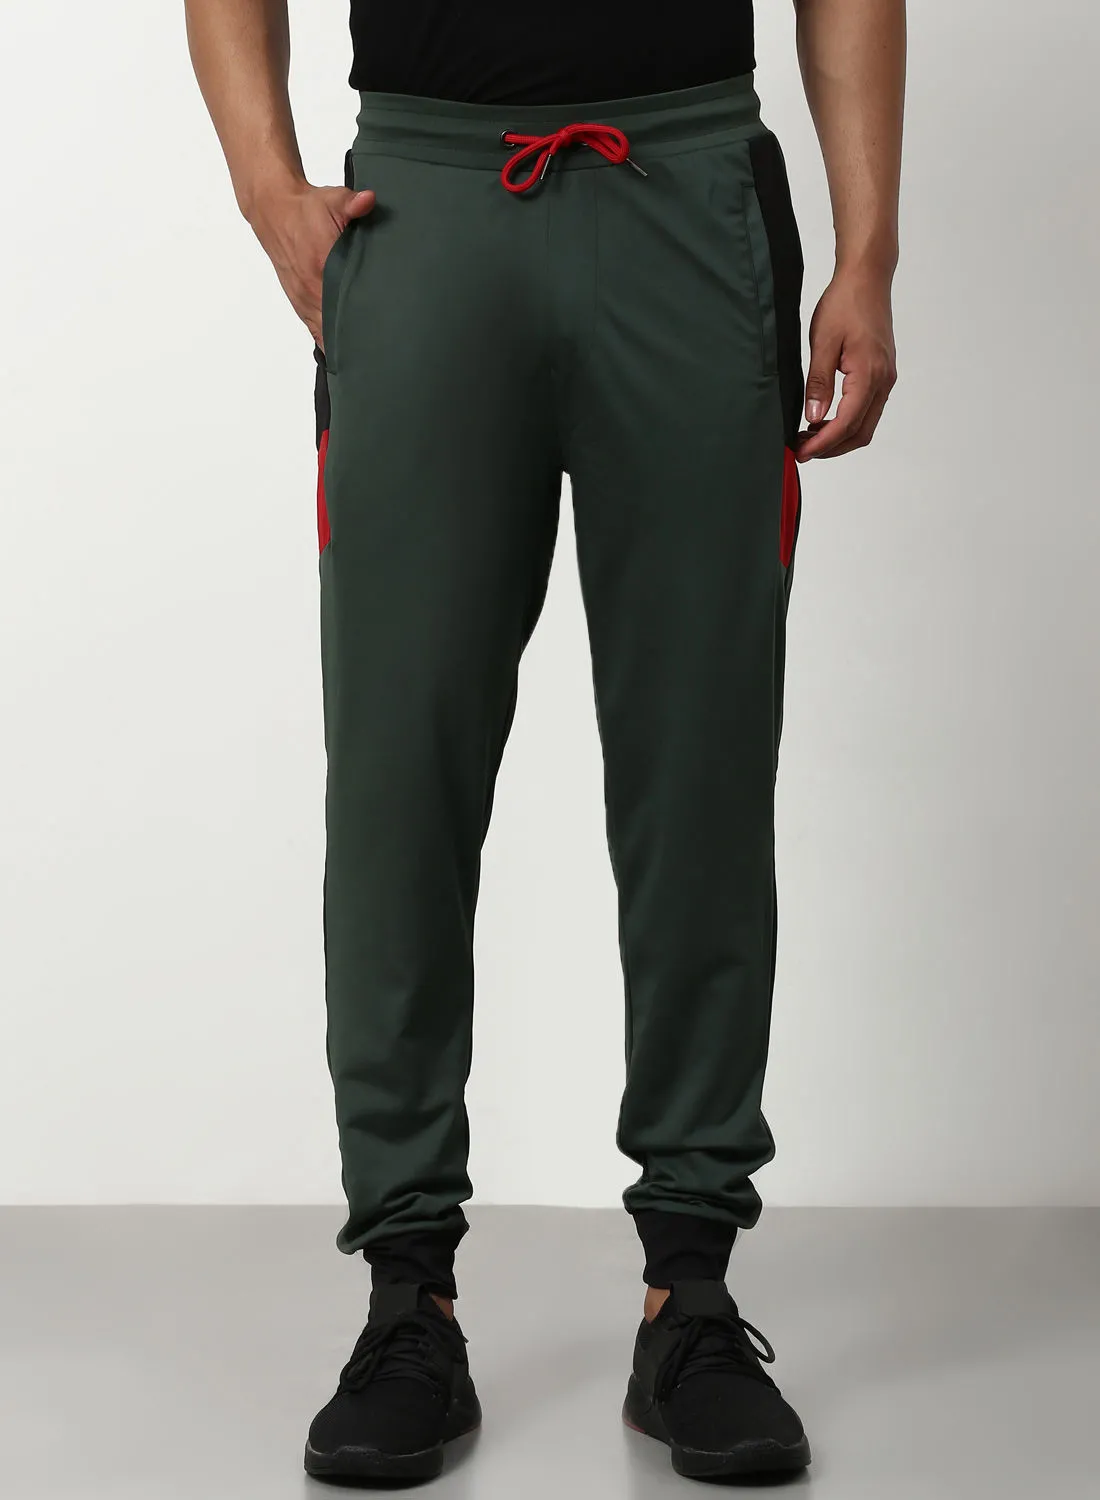 ABOF Active Wear Joggers Green/Red